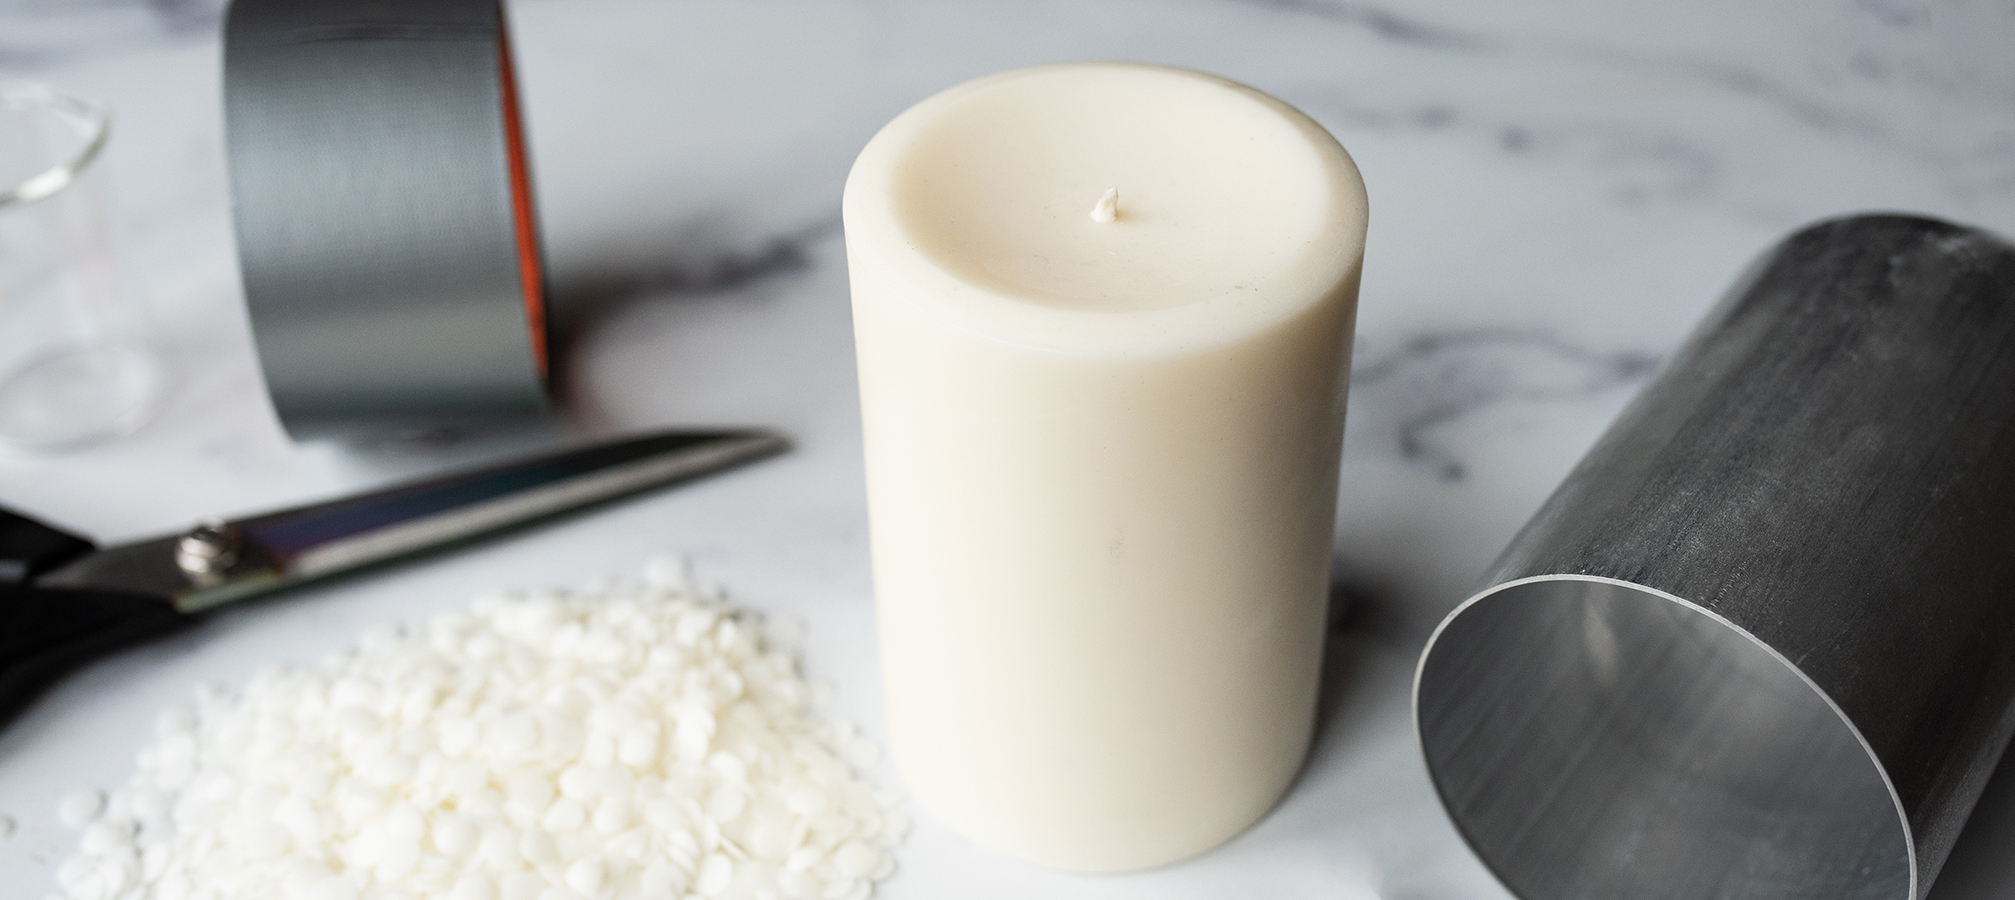 A pillar candle with a mold and other supplies.